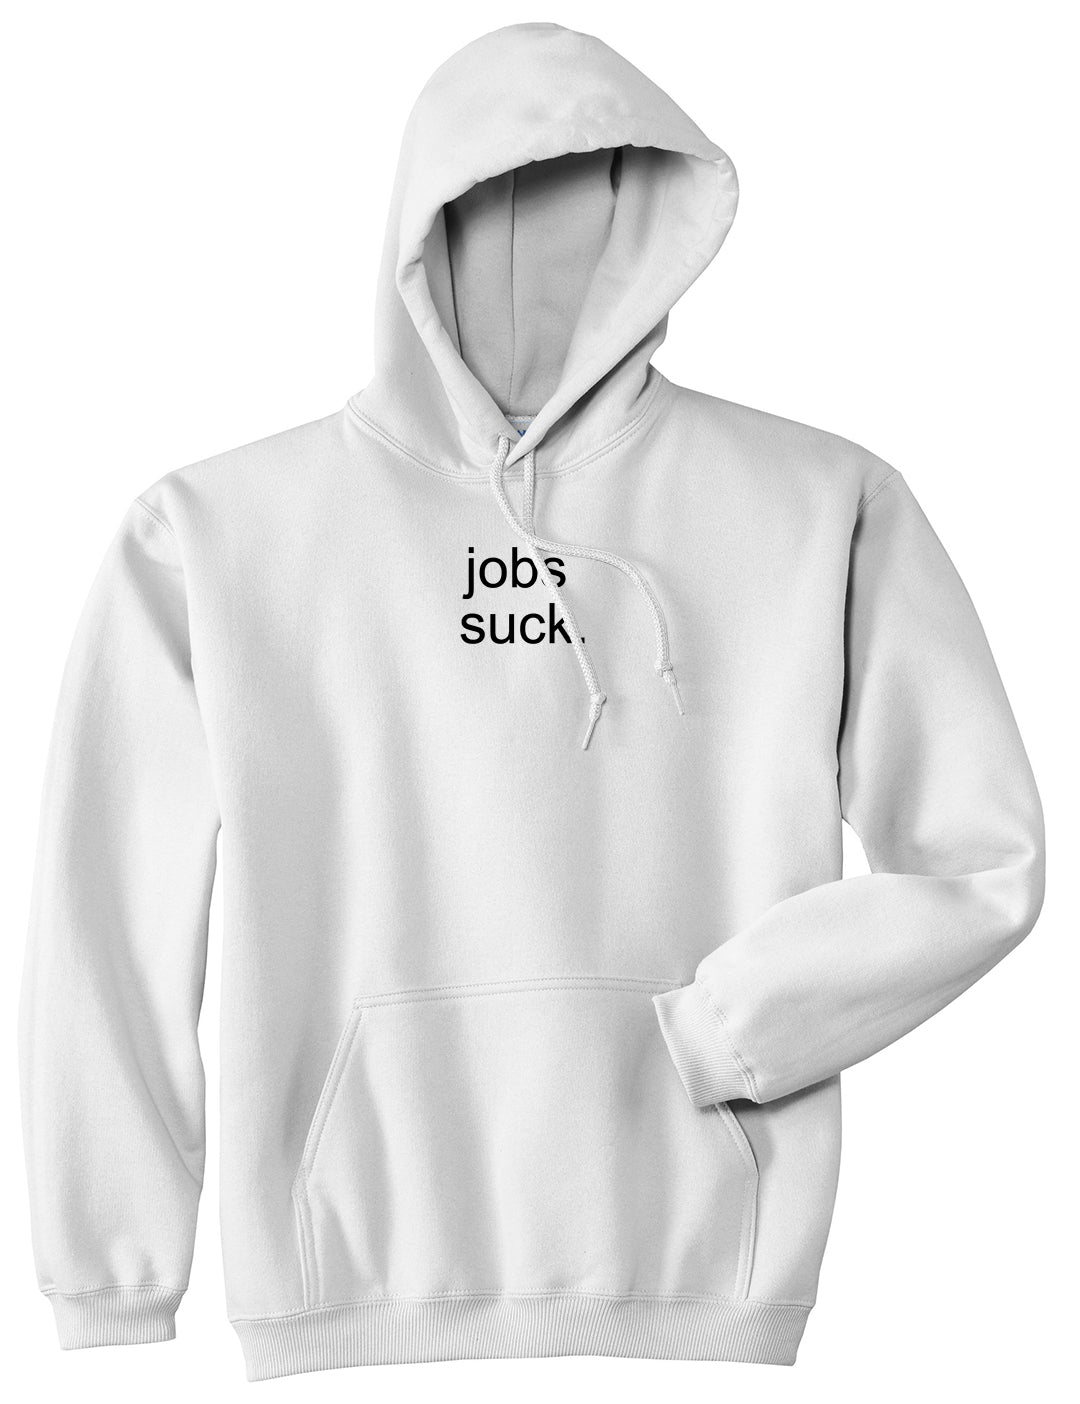 Jobs Suck Pullover Hoodie in White